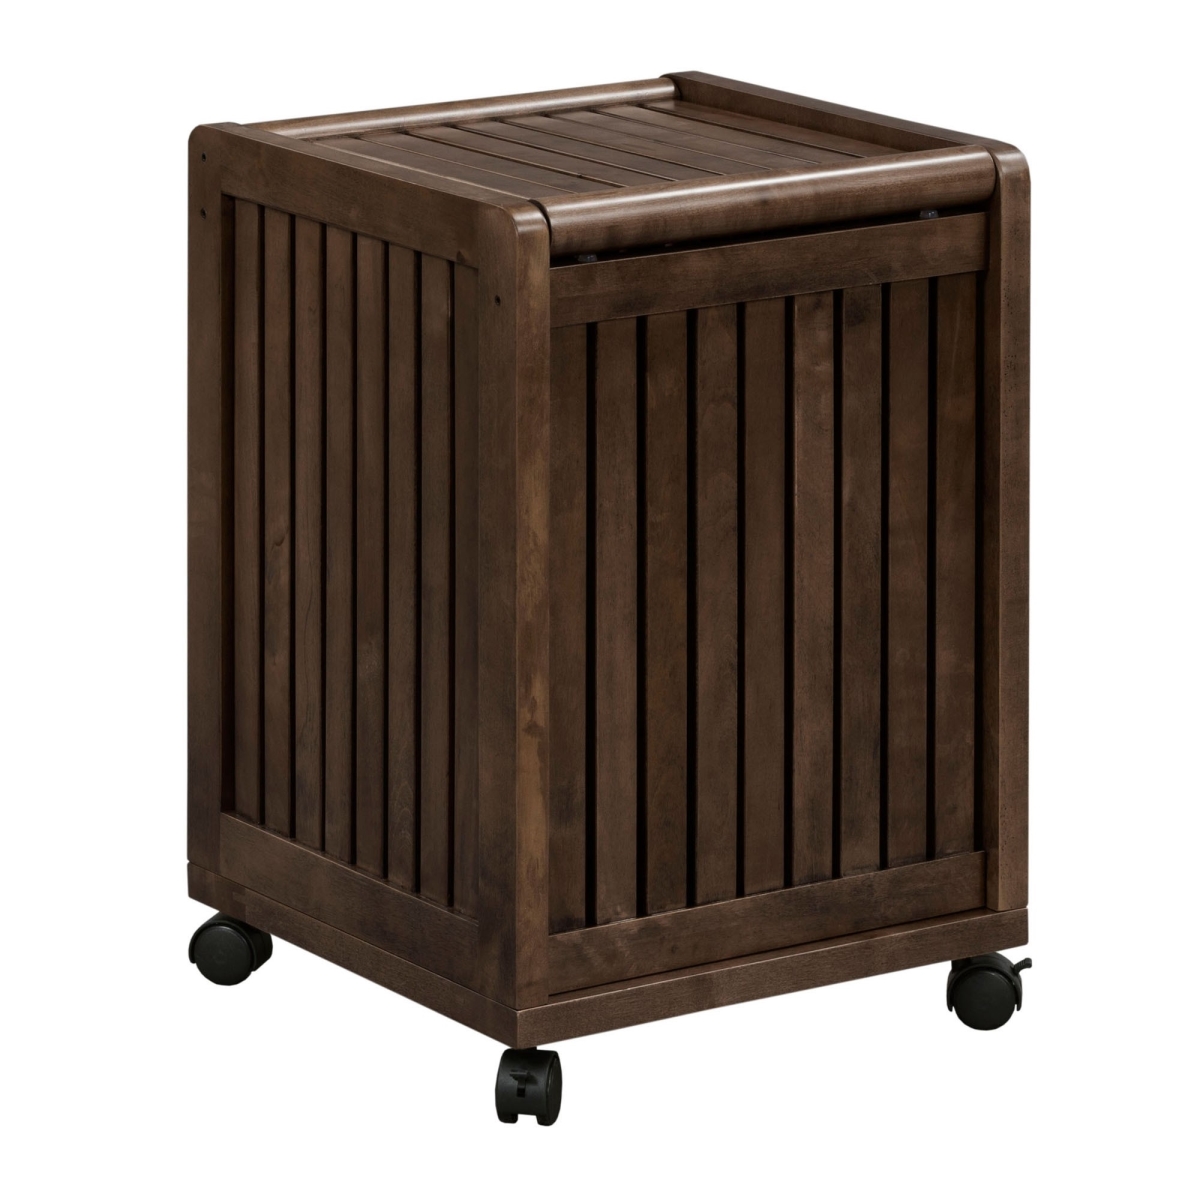 380047 24 In. Rolling Solid Wood Laundry Hamper With Lid, Espresso